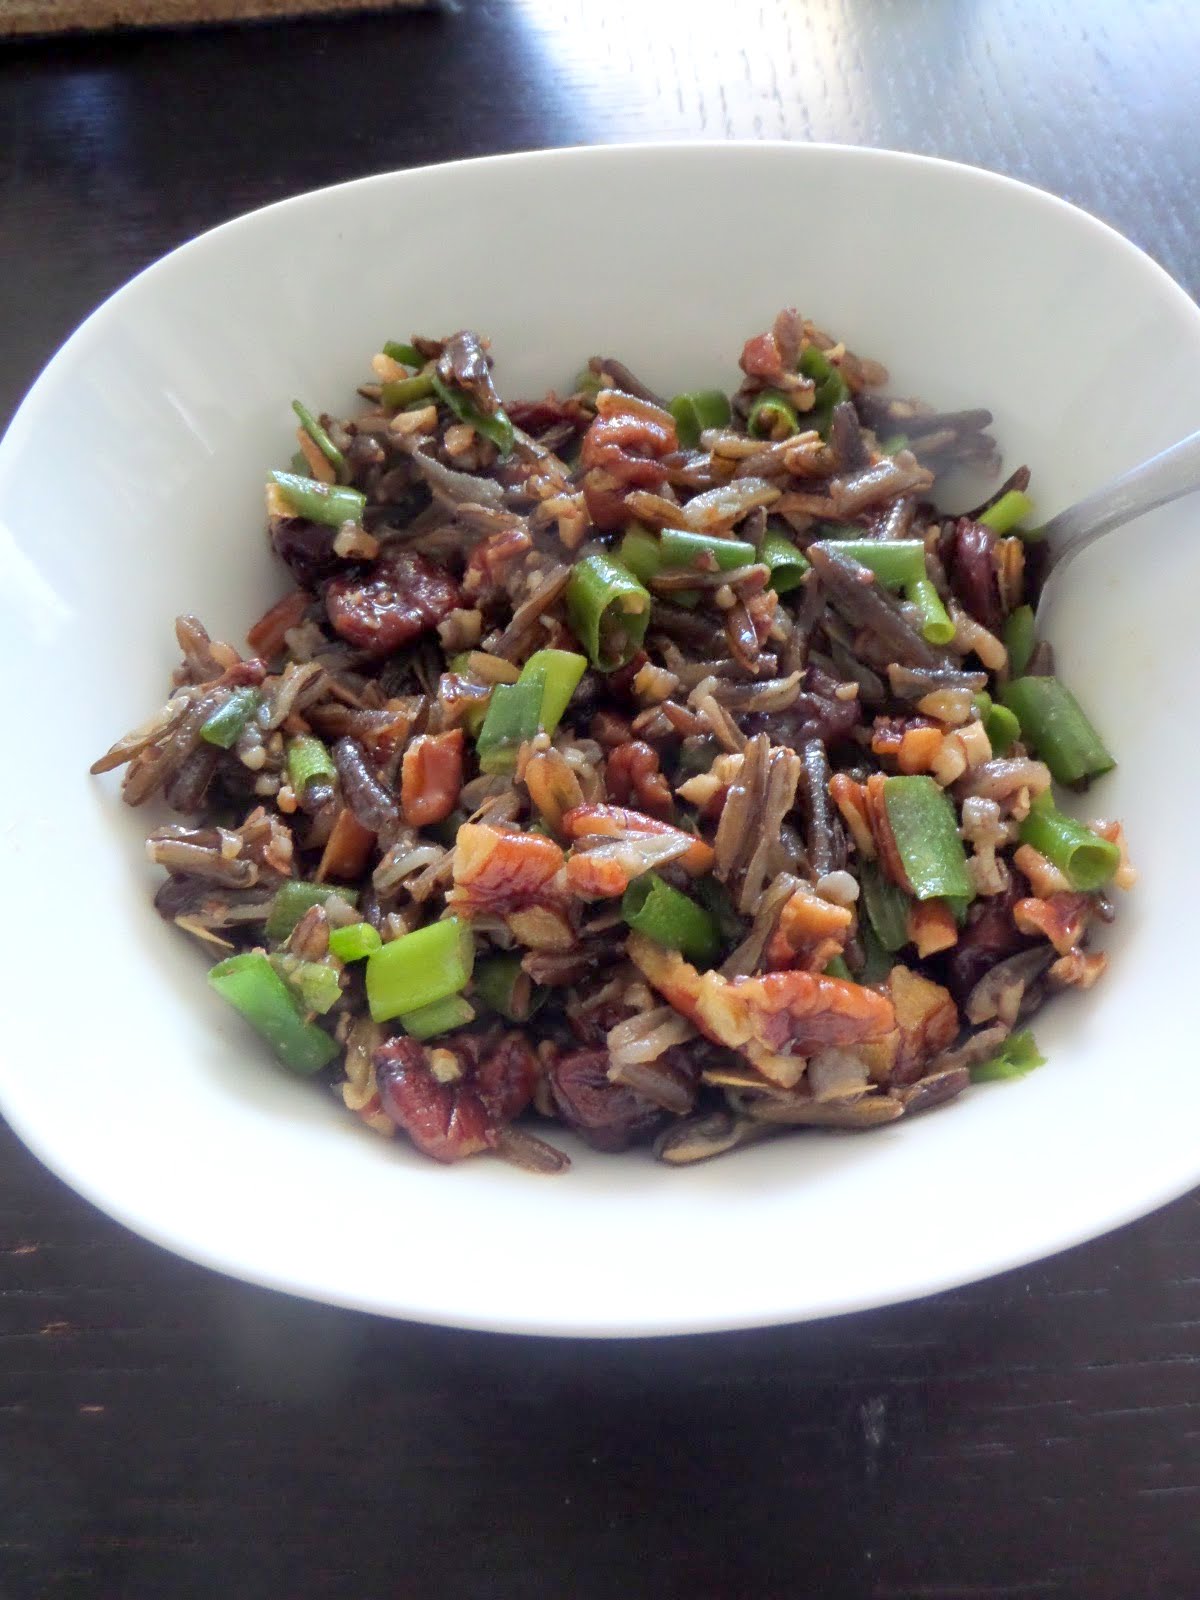 Wild Rice Cherry Pecan Salad:  A salad of wild rice, dried cherries, and pecans tossed in a raspberry vinaigrette.  It makes a great side dish or lunch.